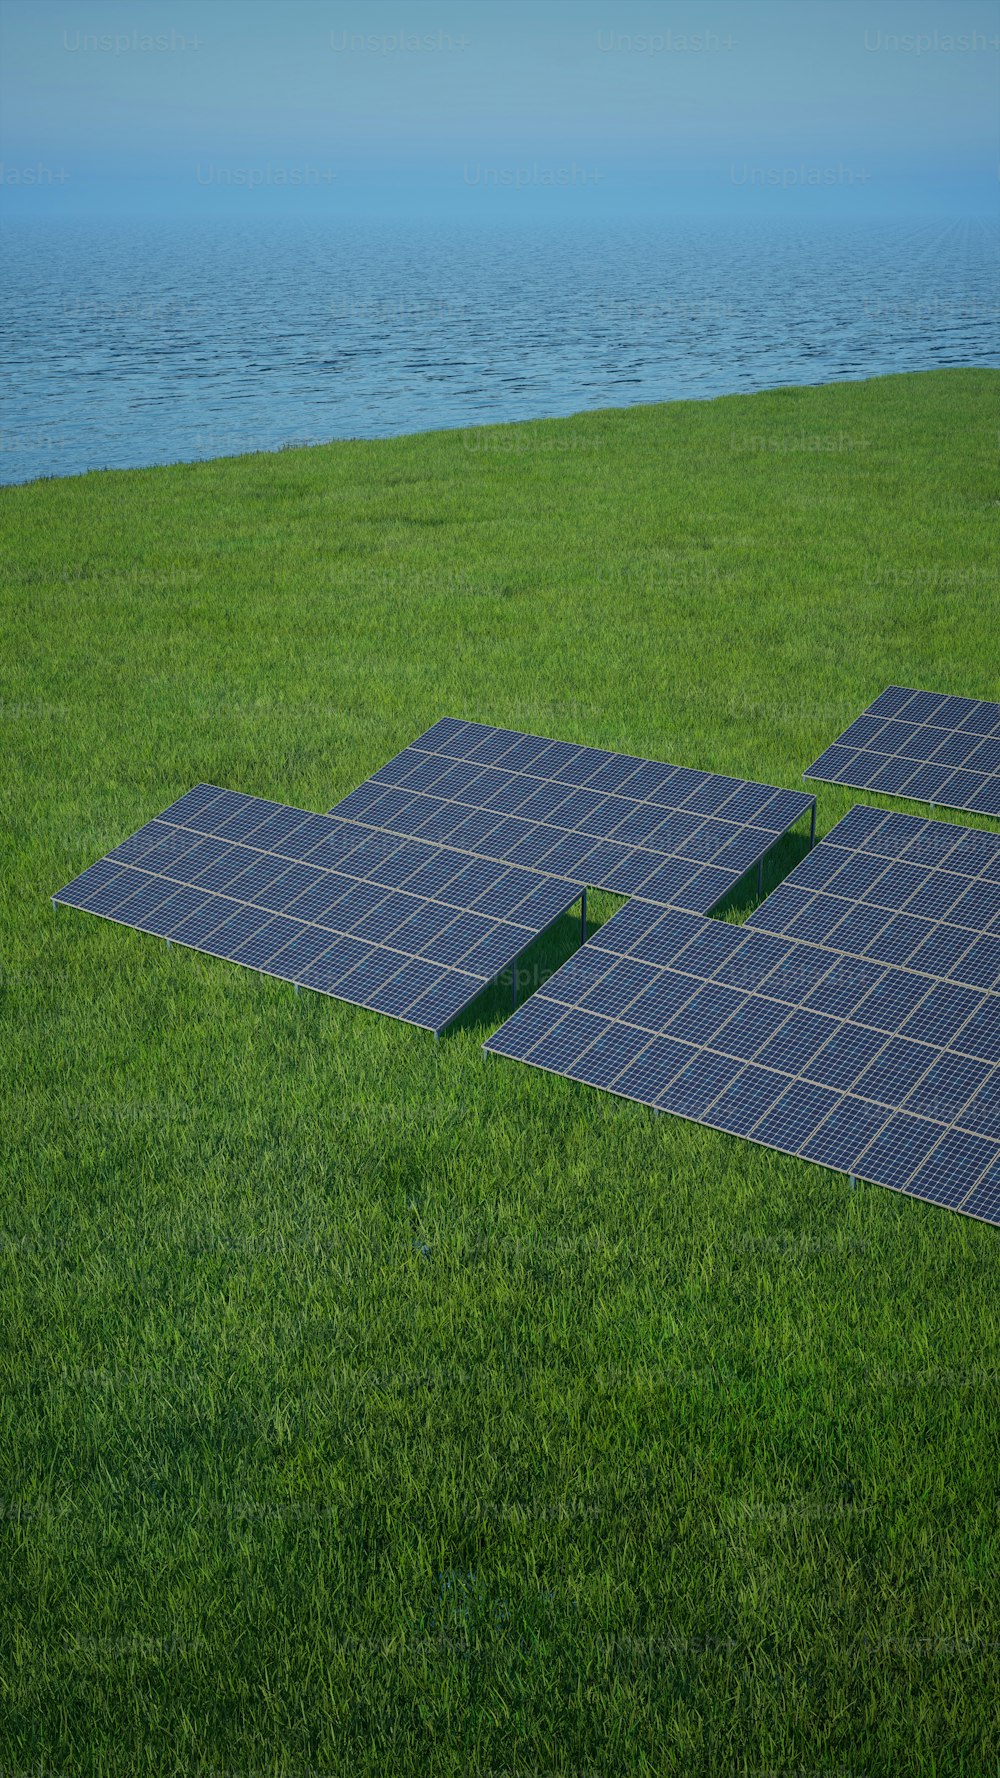 two rows of solar panels in a grassy field